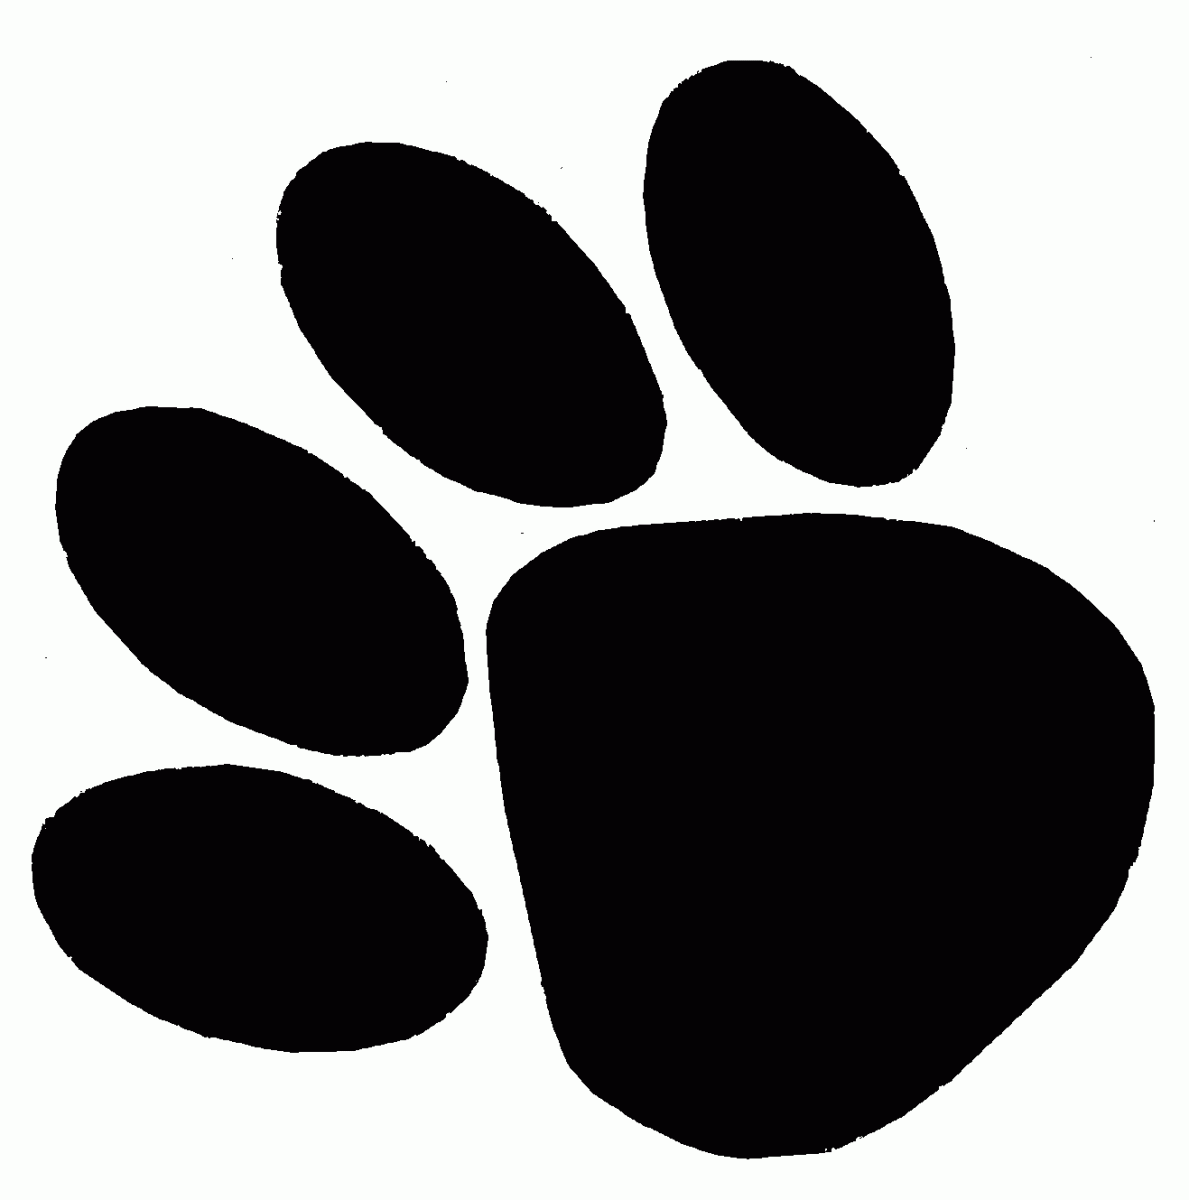 Panther Paw Print Clip Art   Clipart Best